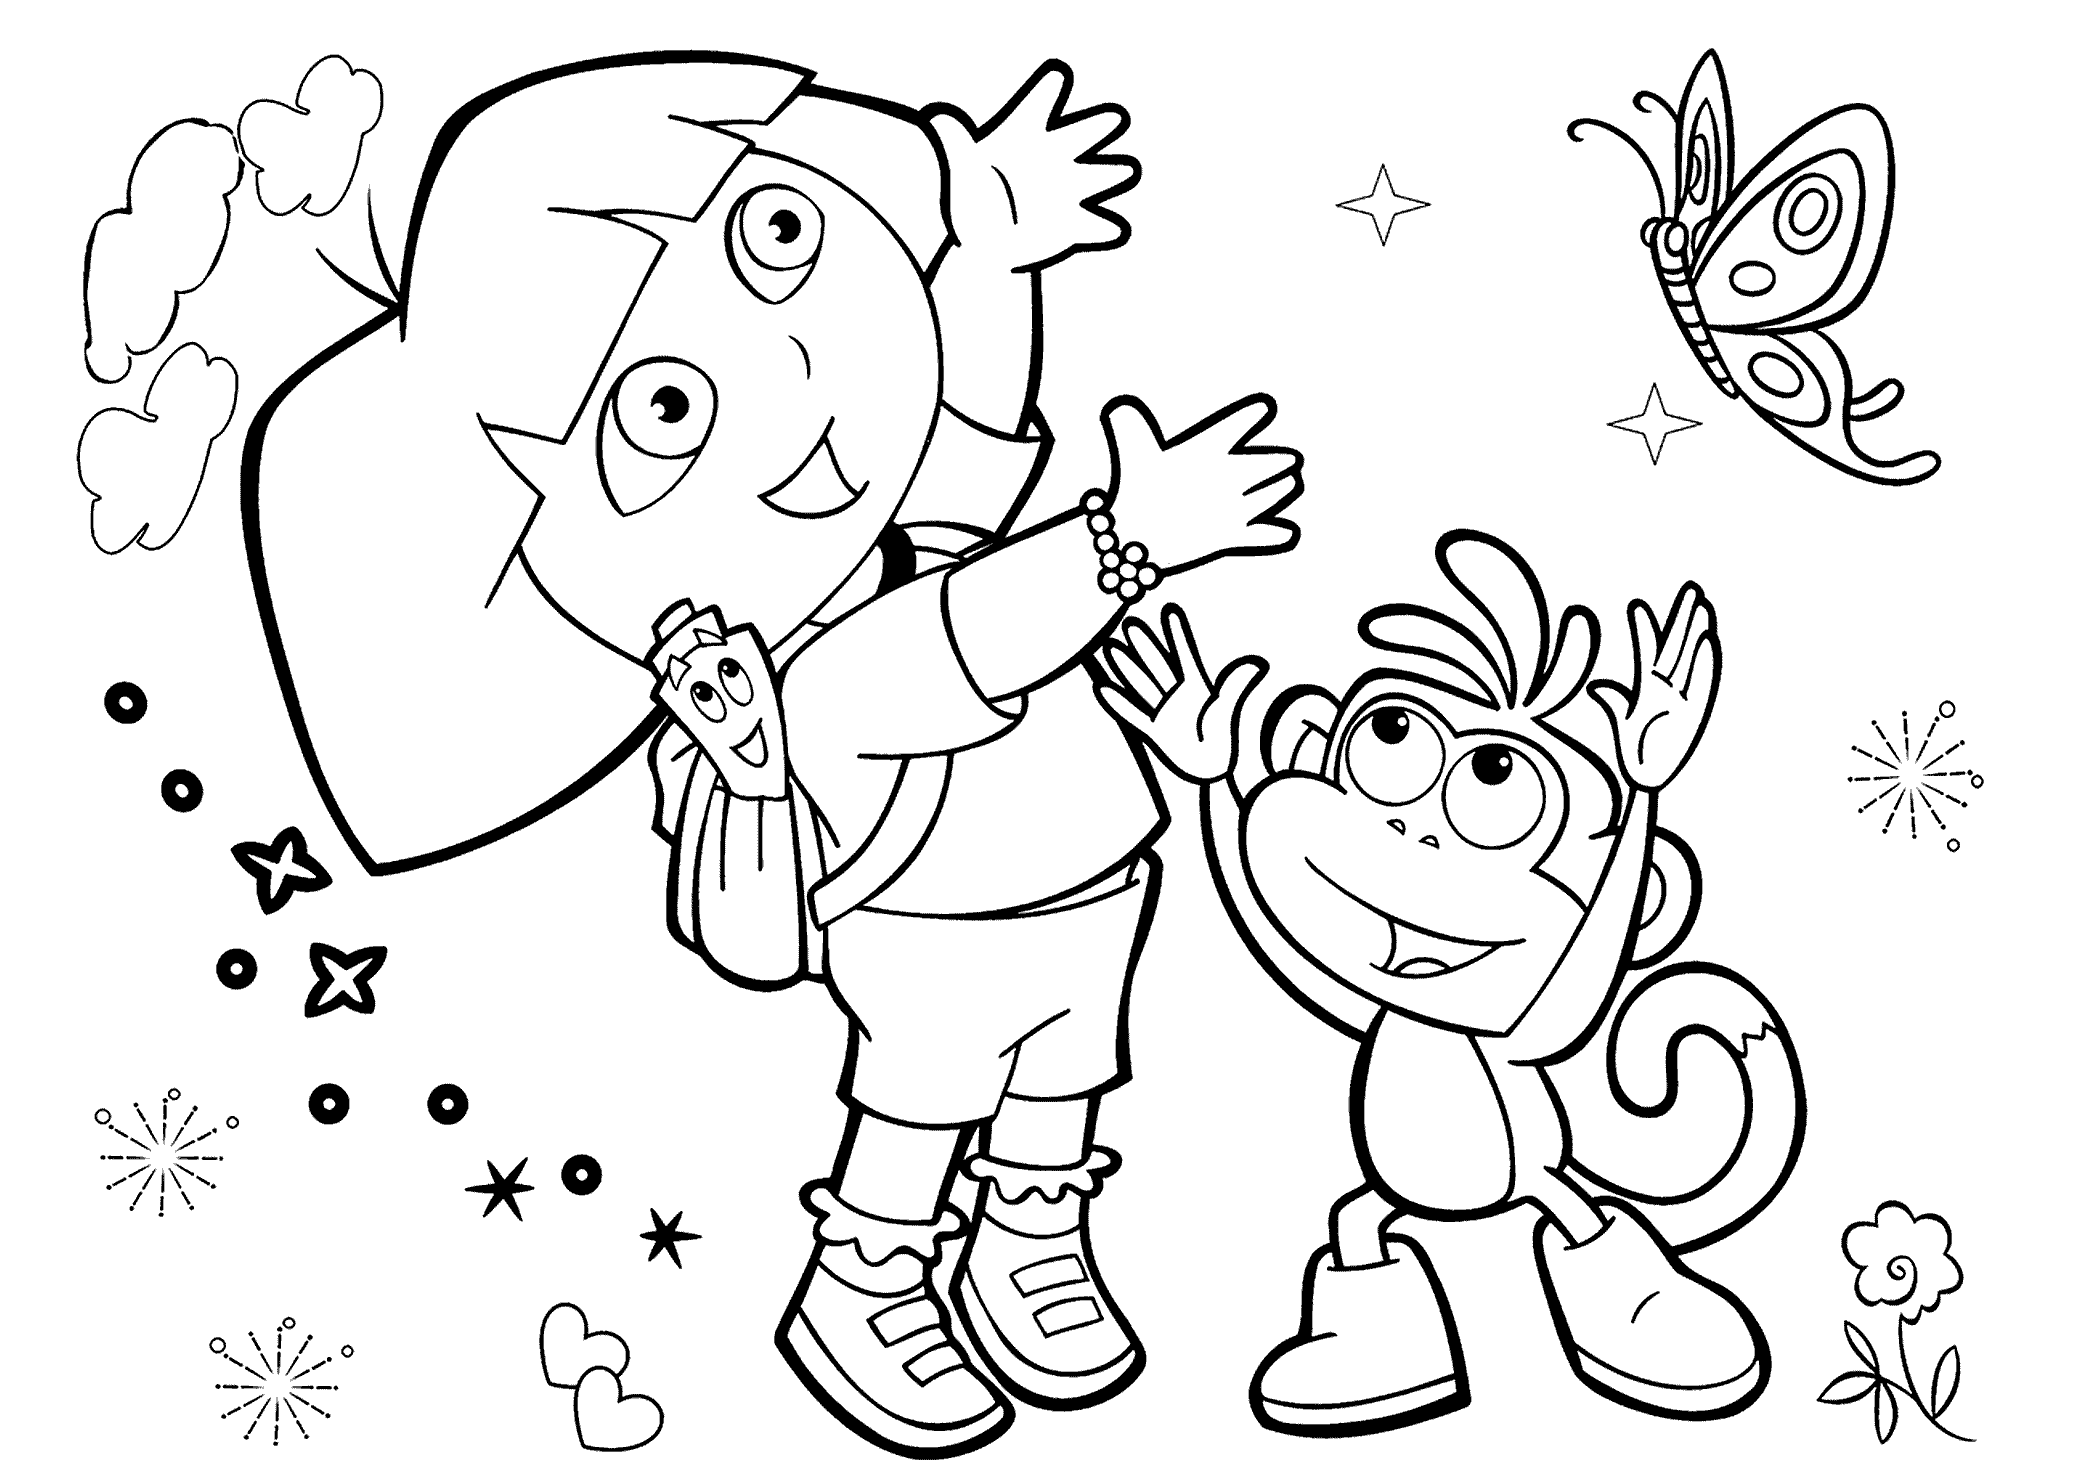 Dora coloring pages with friends printable free cartoon coloring pages dora coloring coloring pages